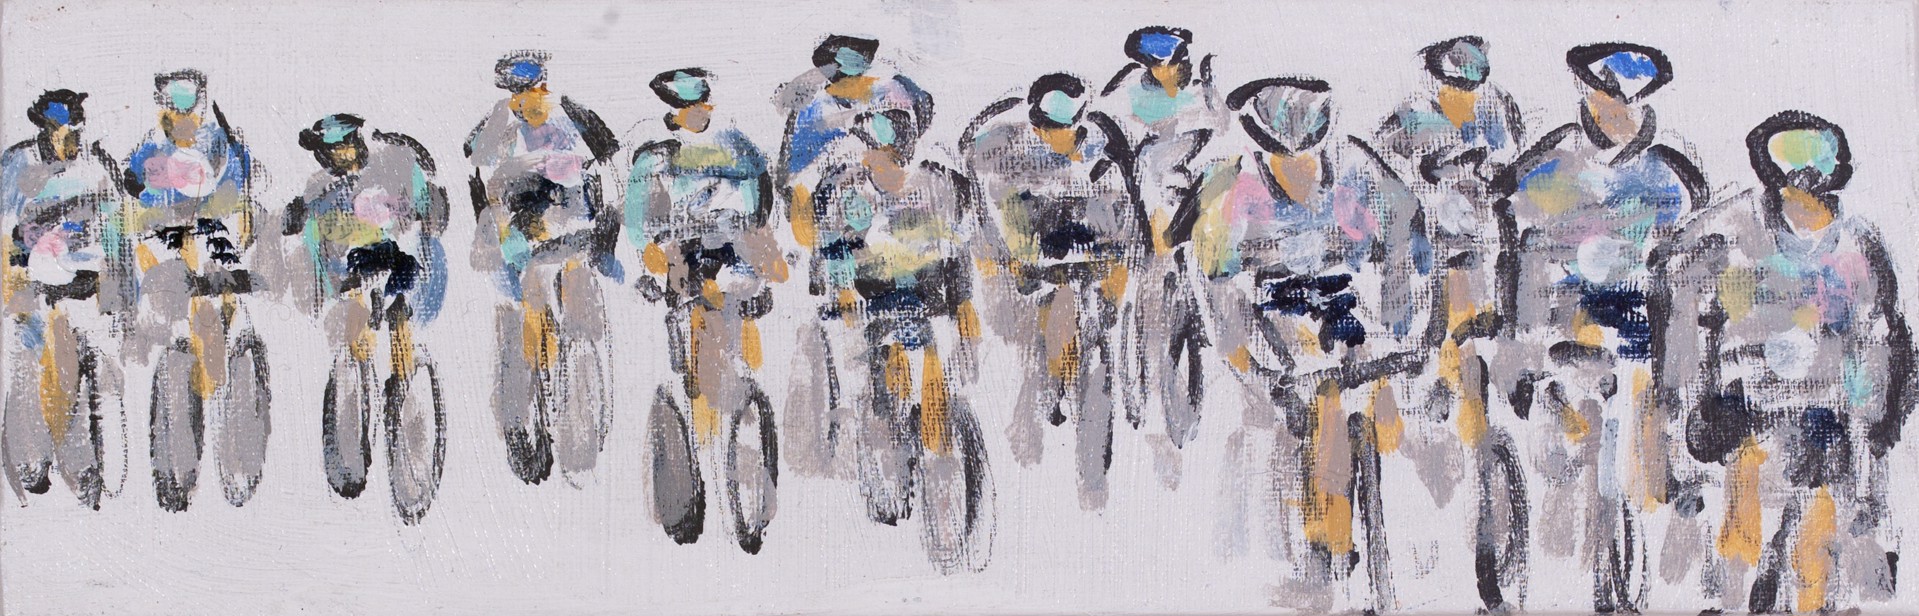 Cyclists Line on White by Heather Blanton